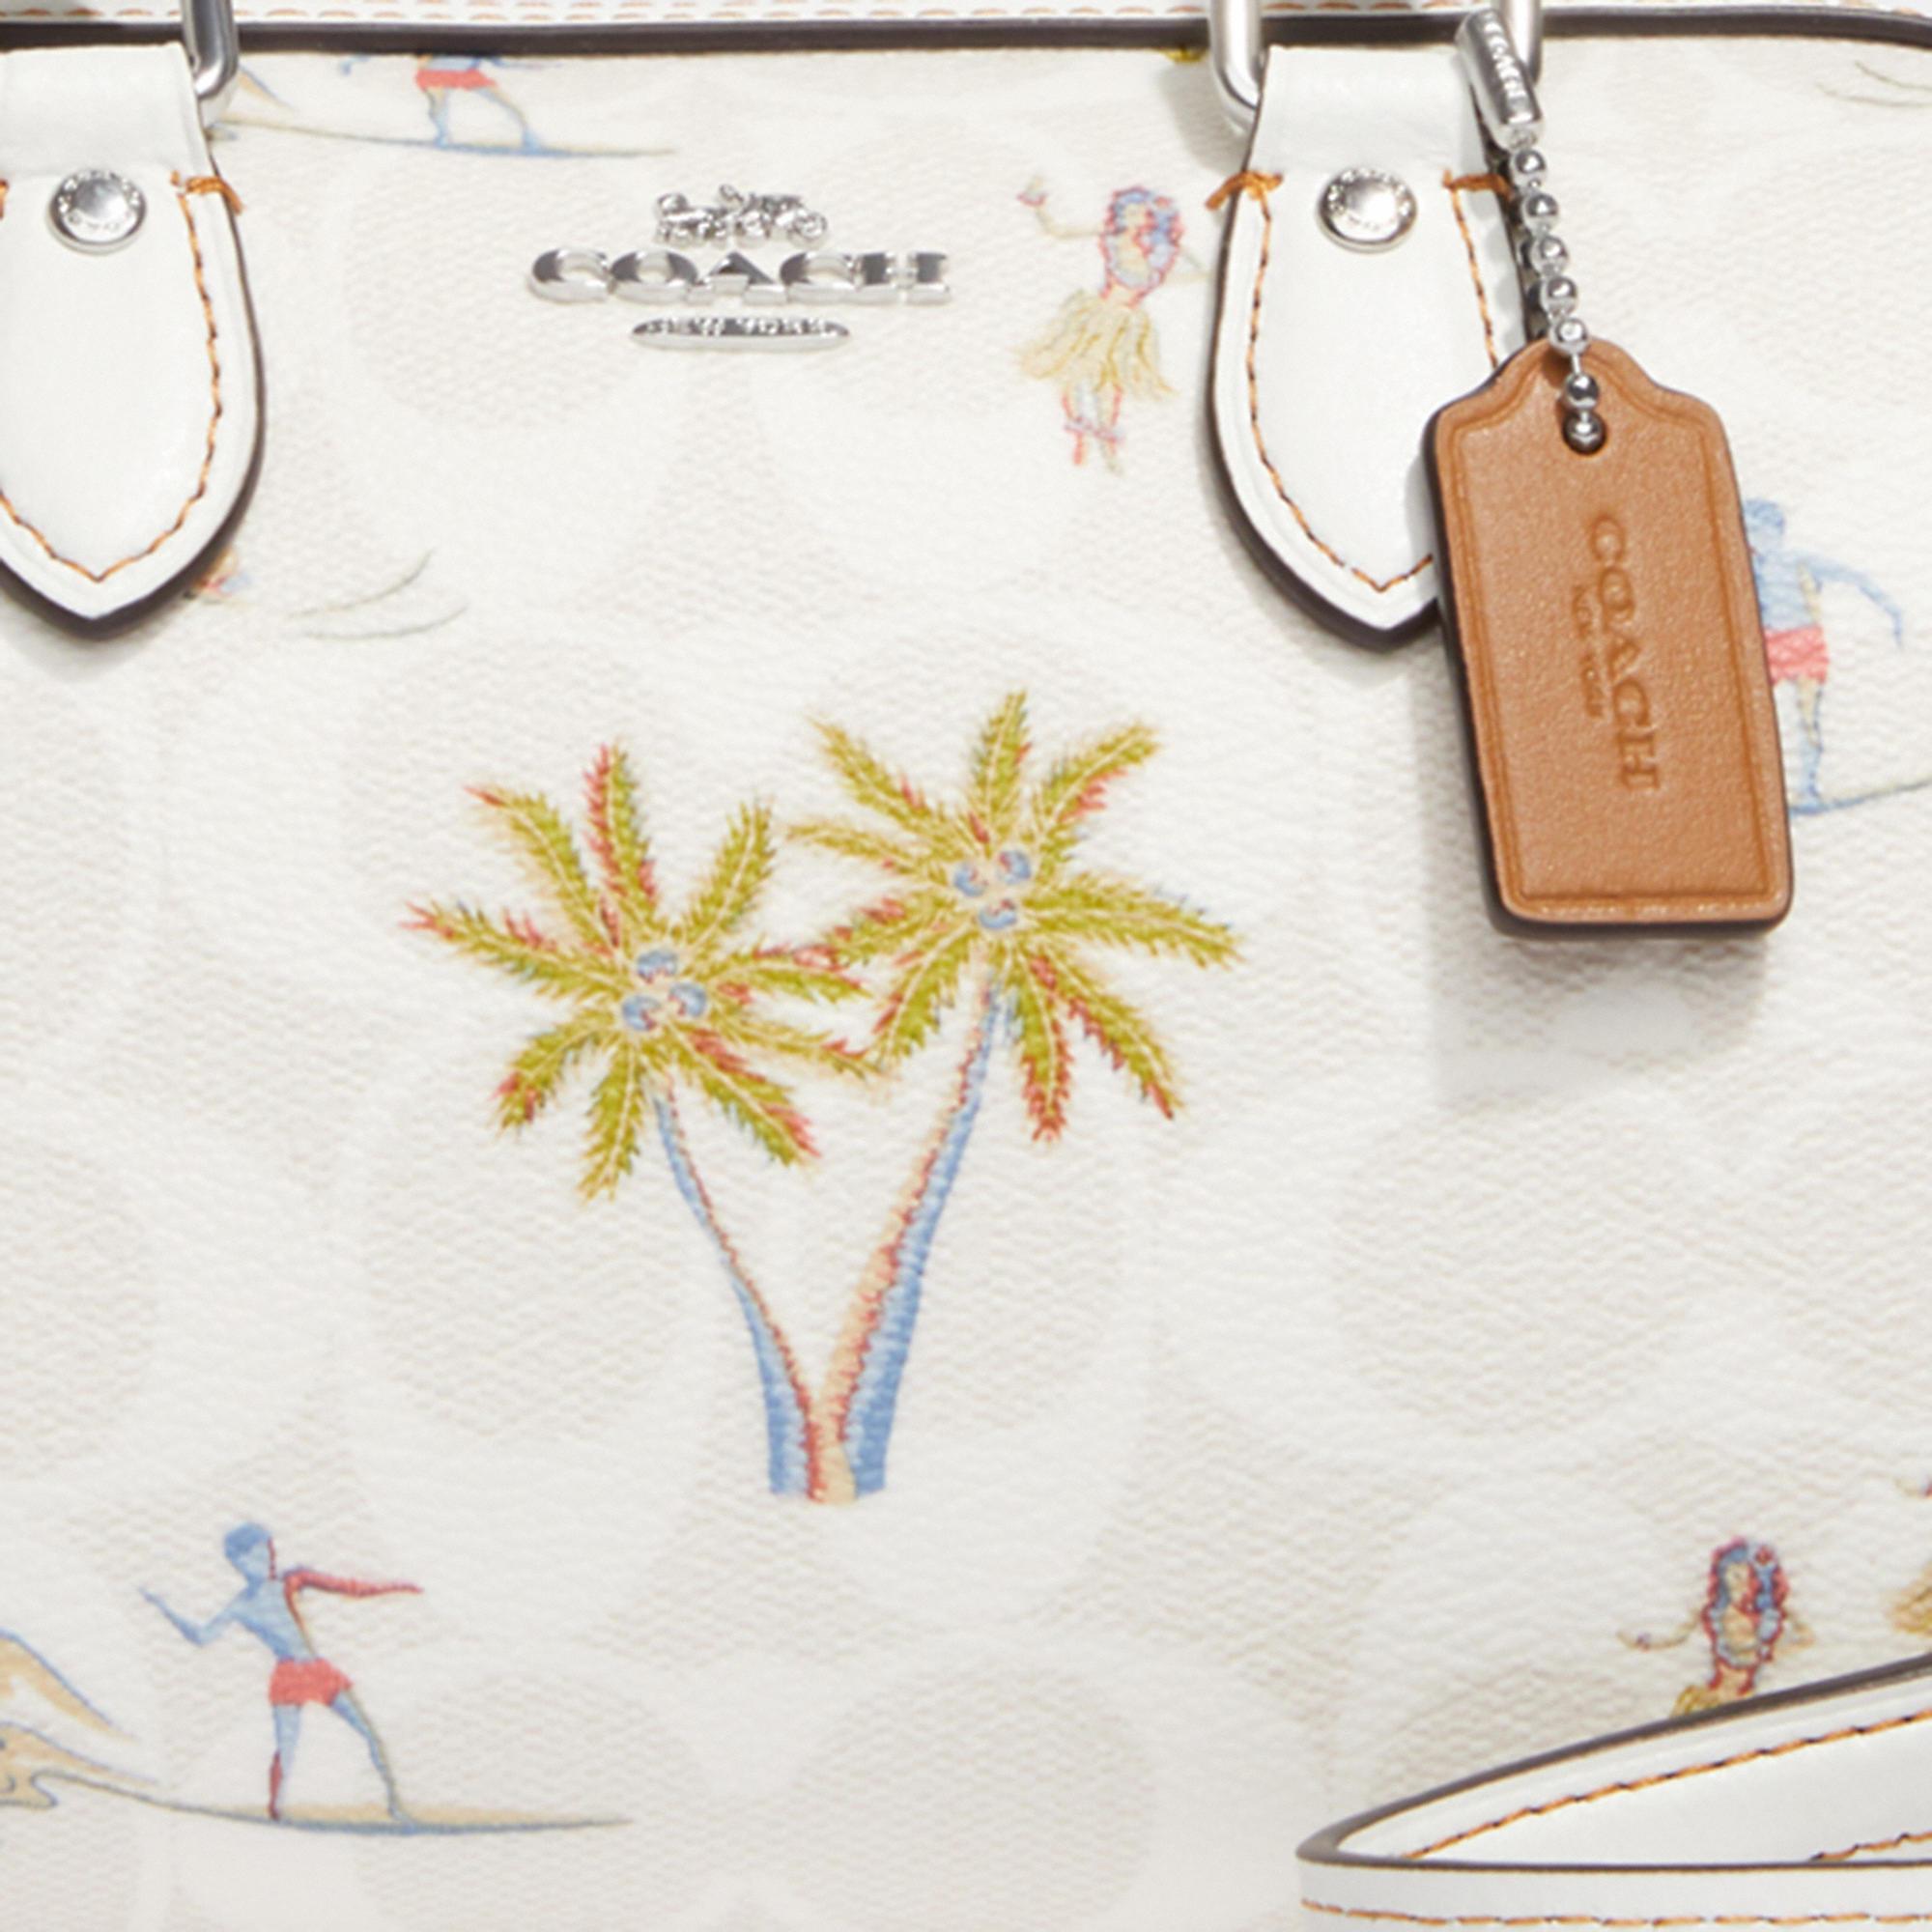 Coach Outlet Mini Rowan Crossbody In Signature Canvas With Hula